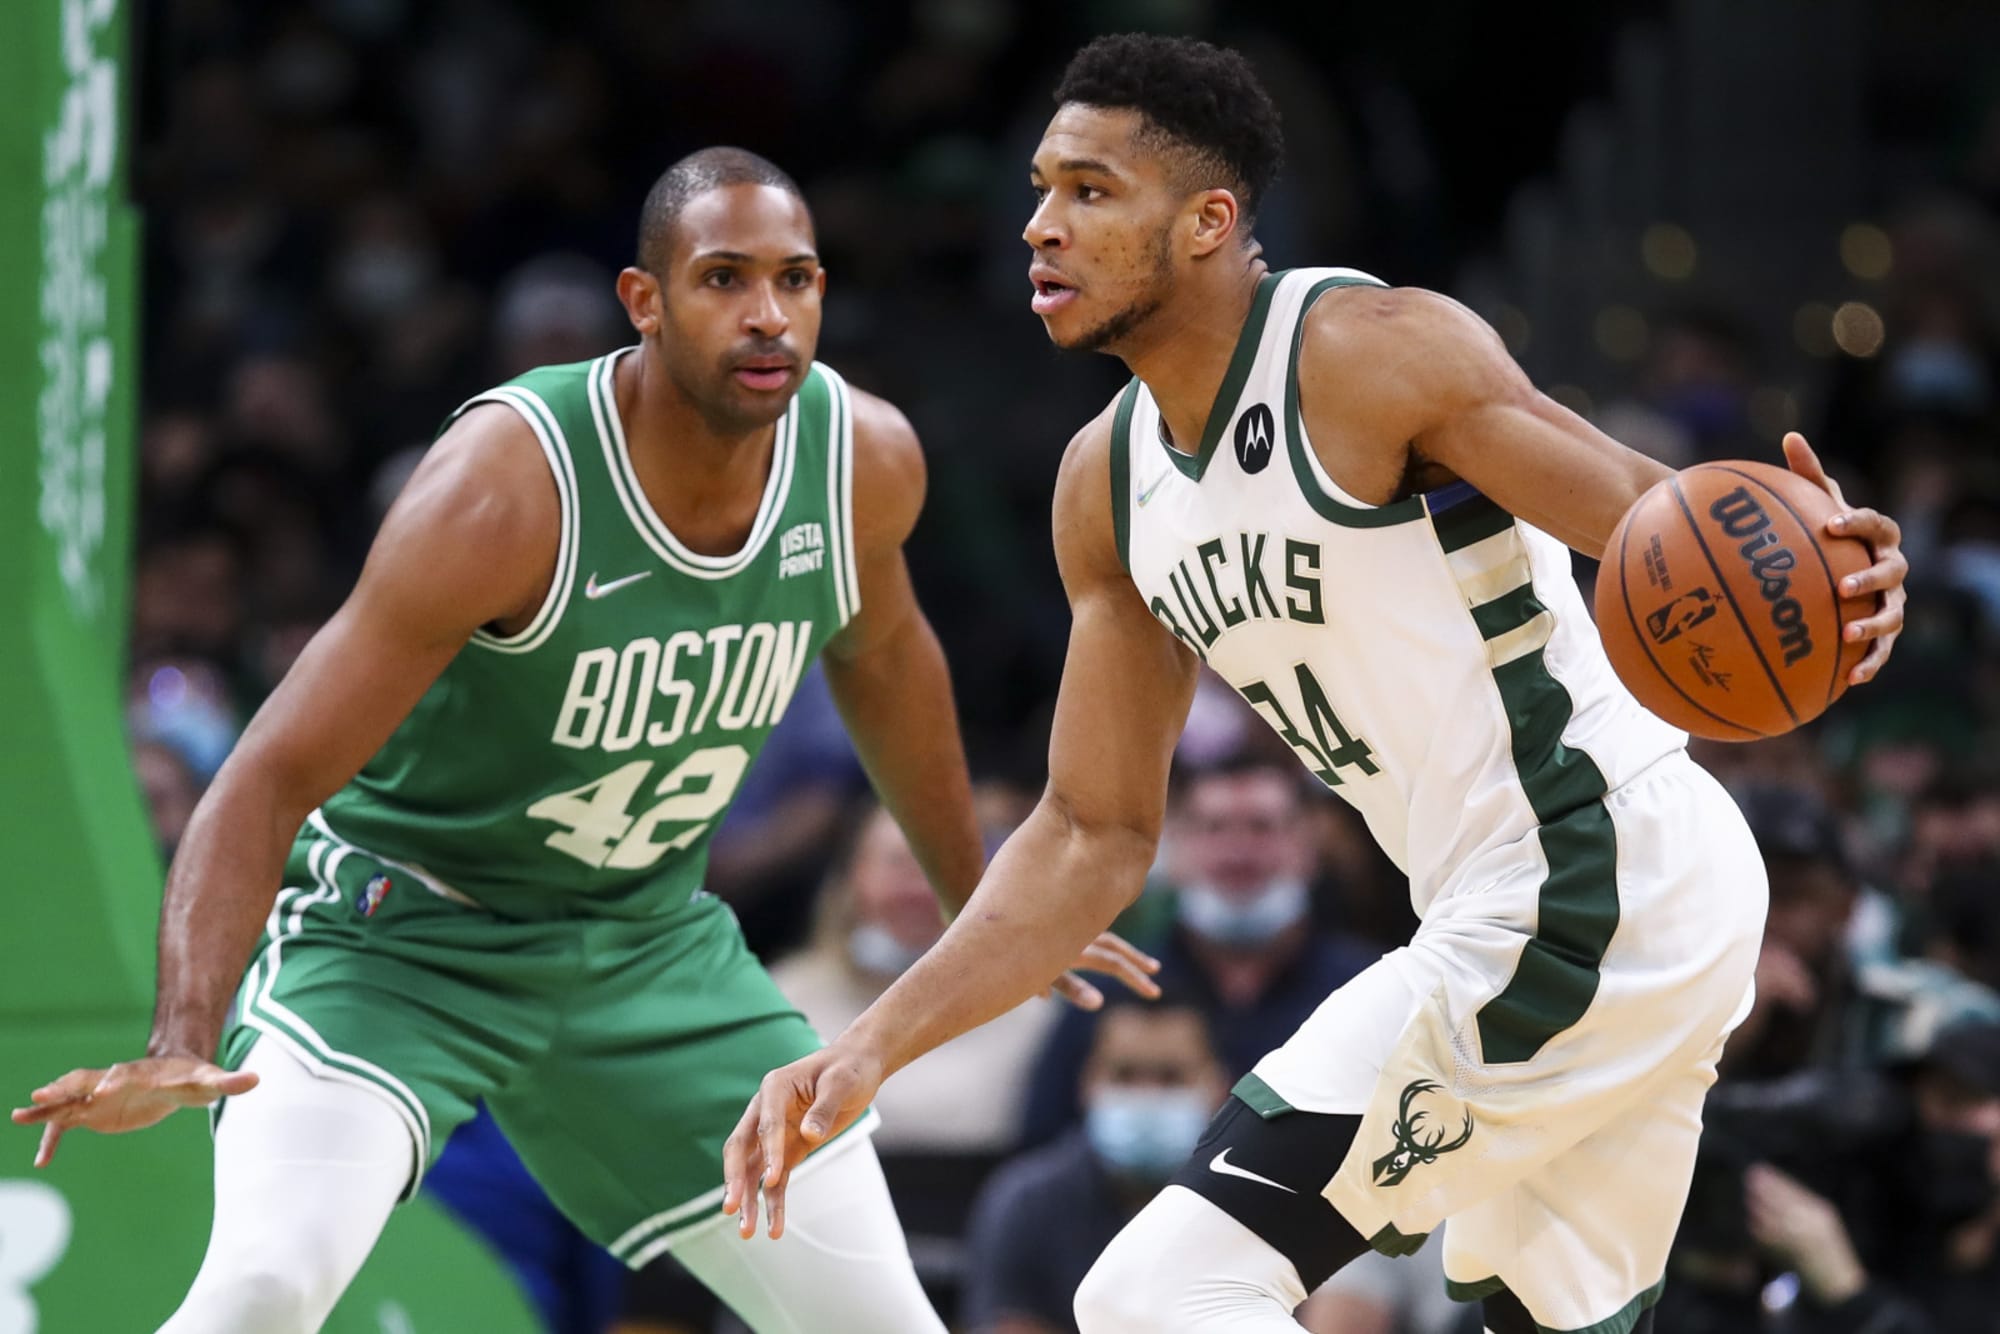 What to know about the Boston Celtics, who face Bucks in NBA playoffs